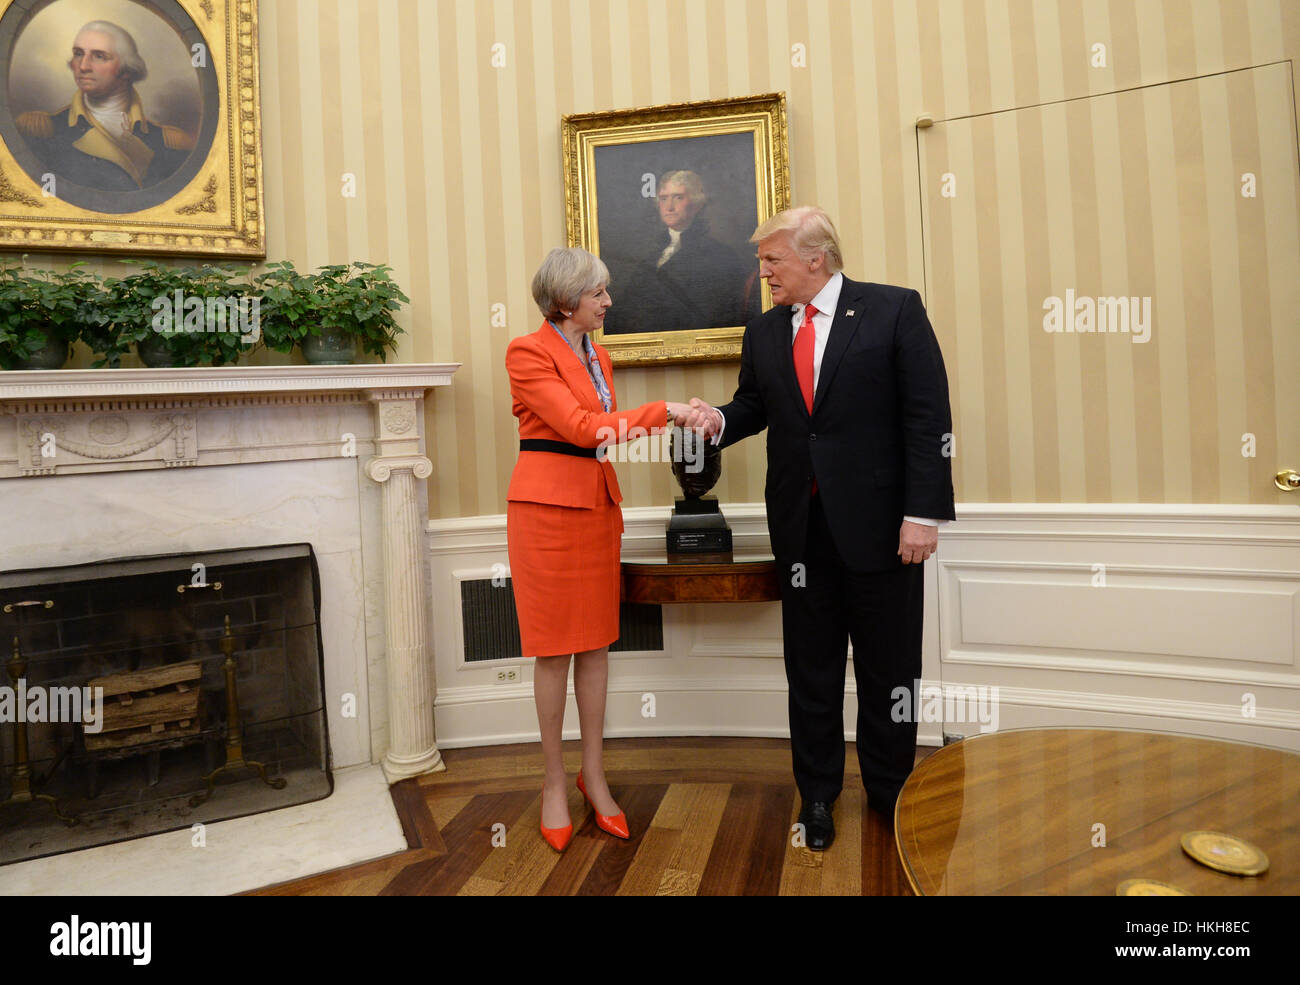 Prime Minister Theresa May meeting US President Donald Trump in the Oval Office of the White House, Washington DC, USA. Stock Photo